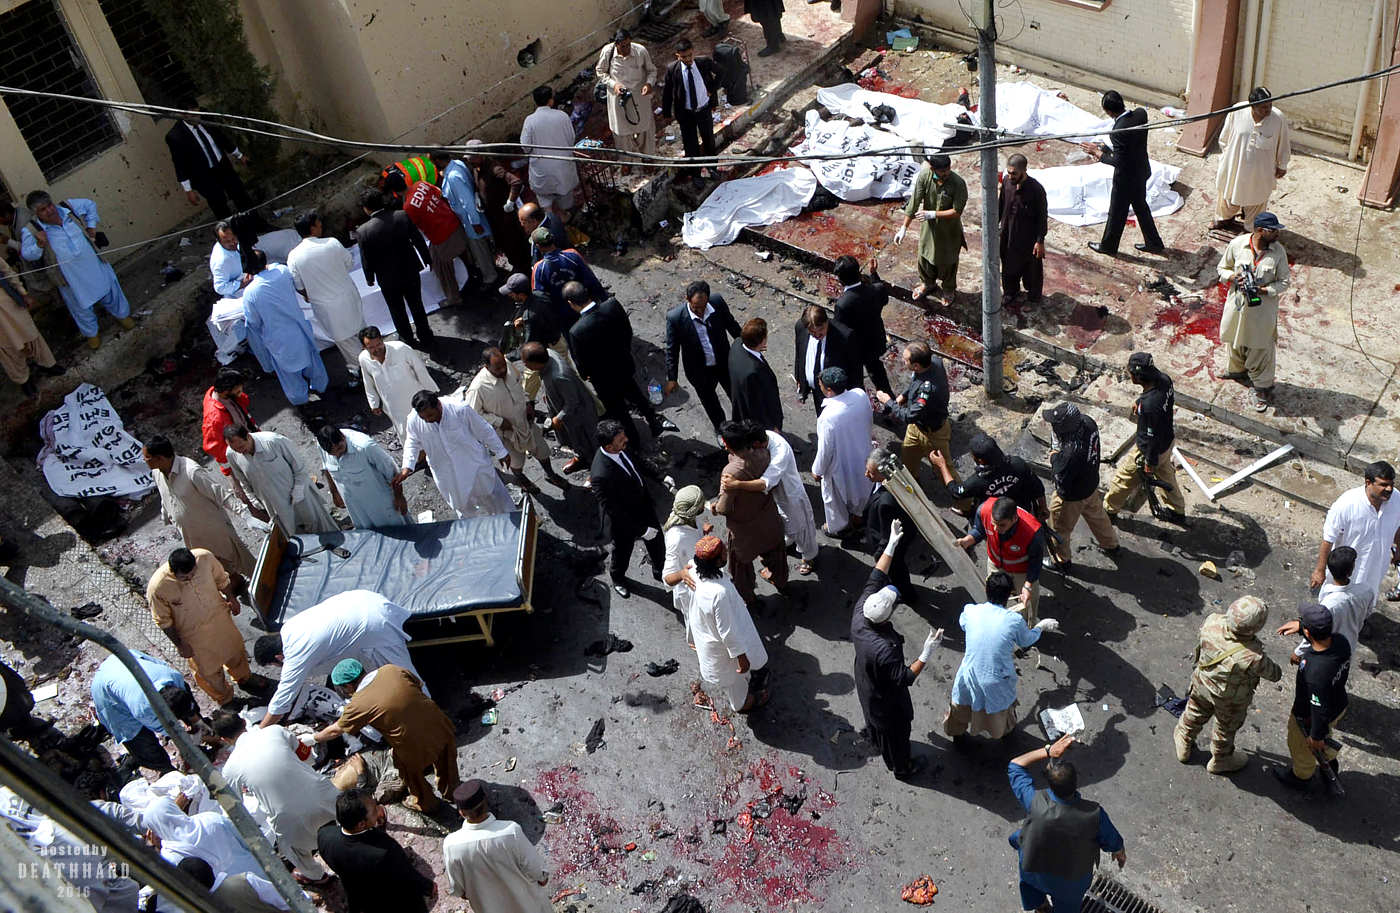 lawyer-killed-mourners-at-hospital-hit-by-suicide-bomber-4-Quetta-PK-aug-8-16.jpg